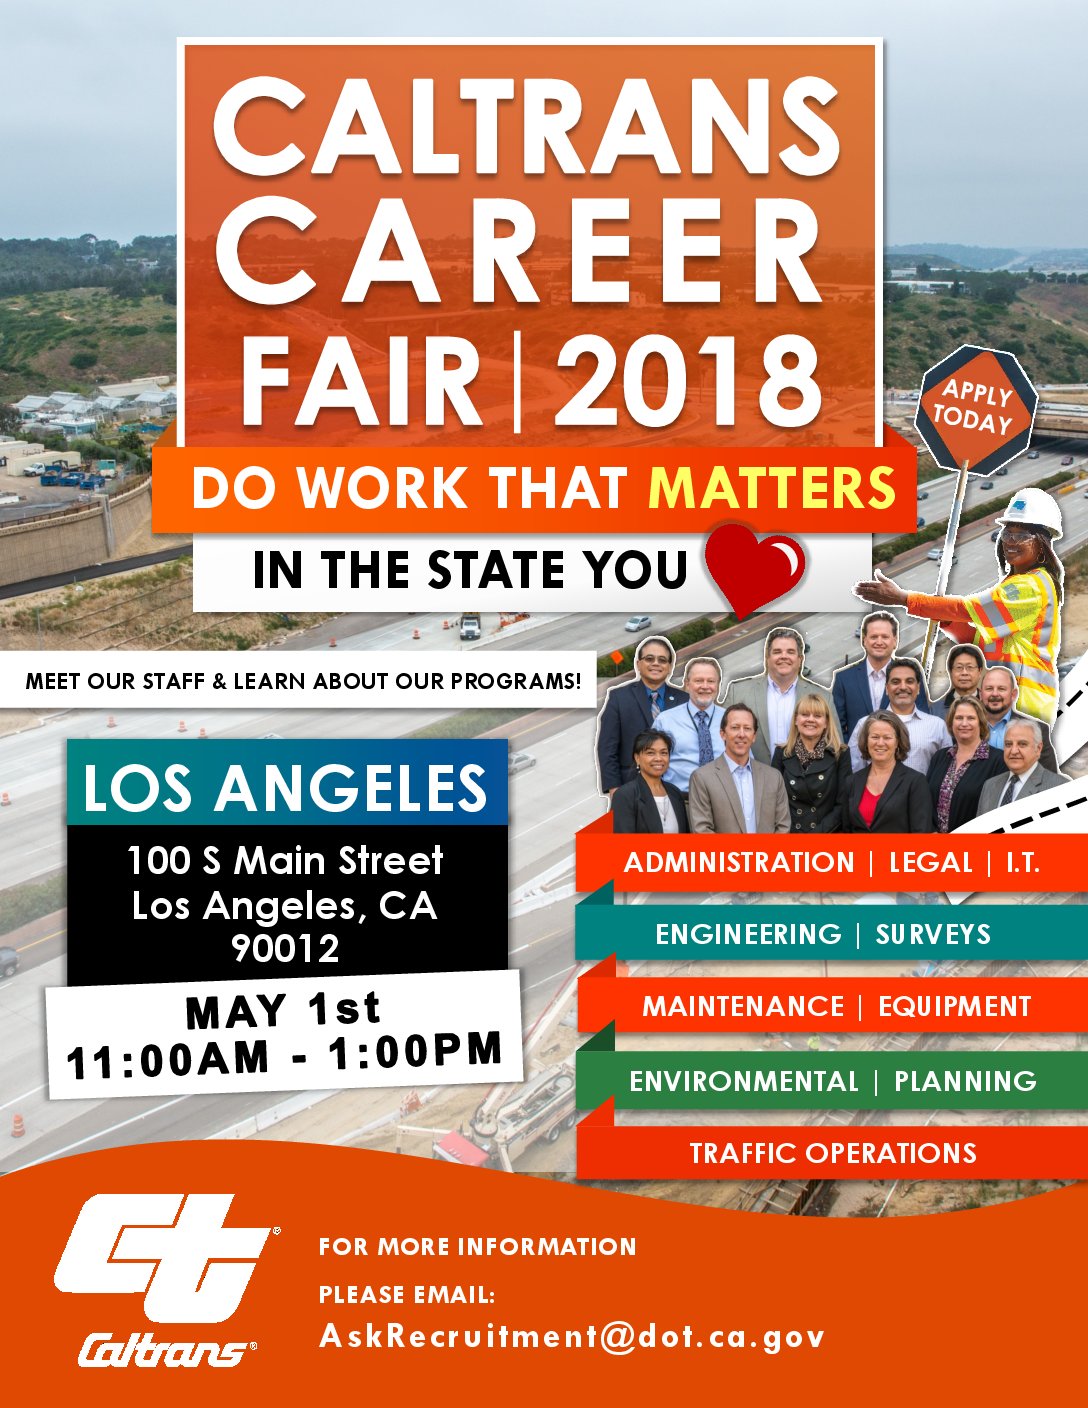 Featured image for “Caltrans Career Fair 2018”